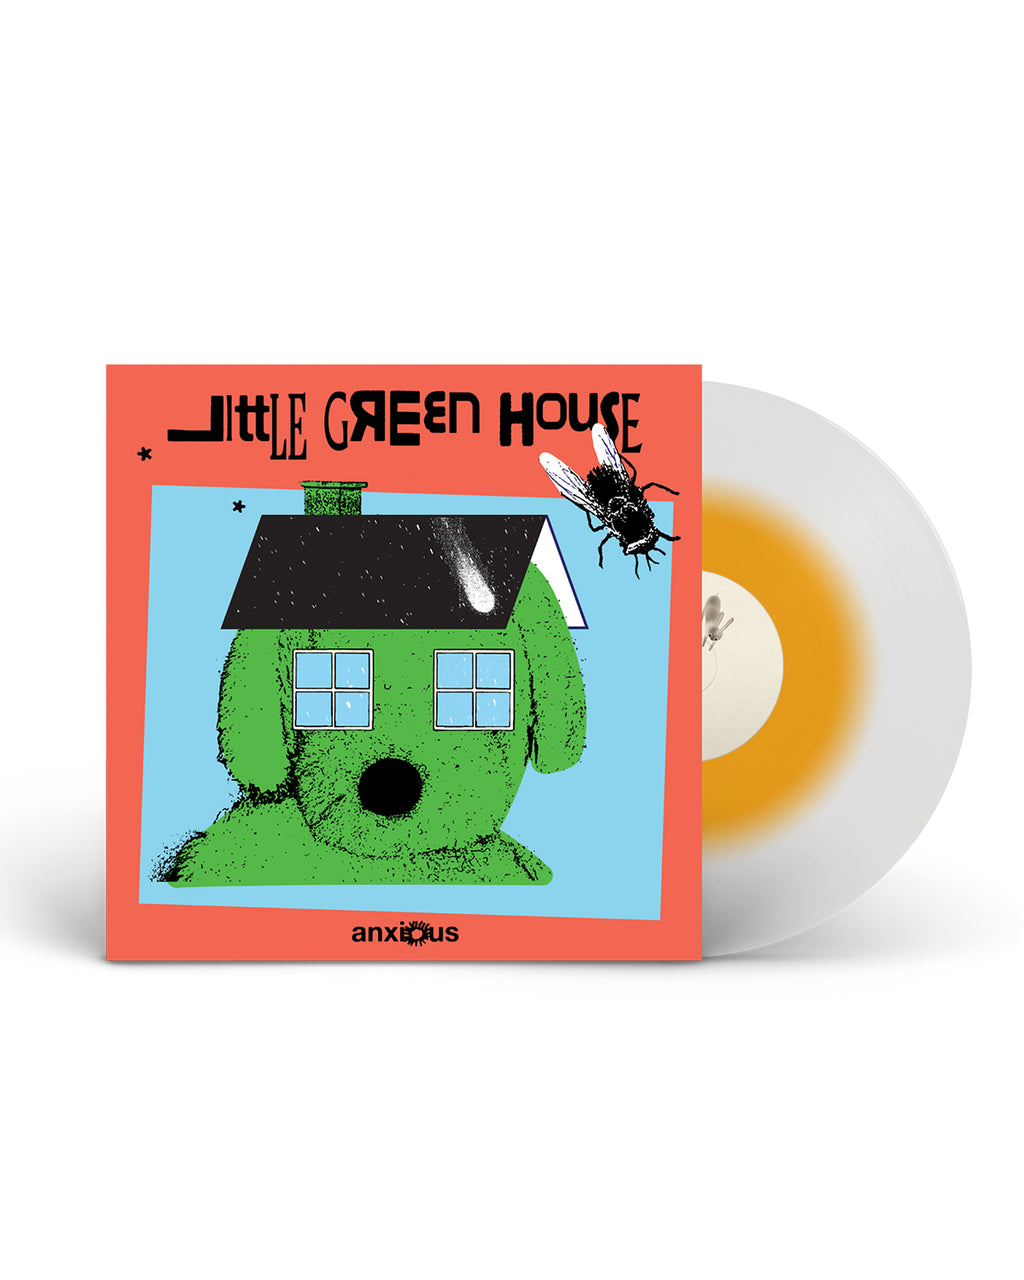 Anxious "Little Green House" Alternate Vinyl Sleeve And Limited Edition Record Variant - Orange